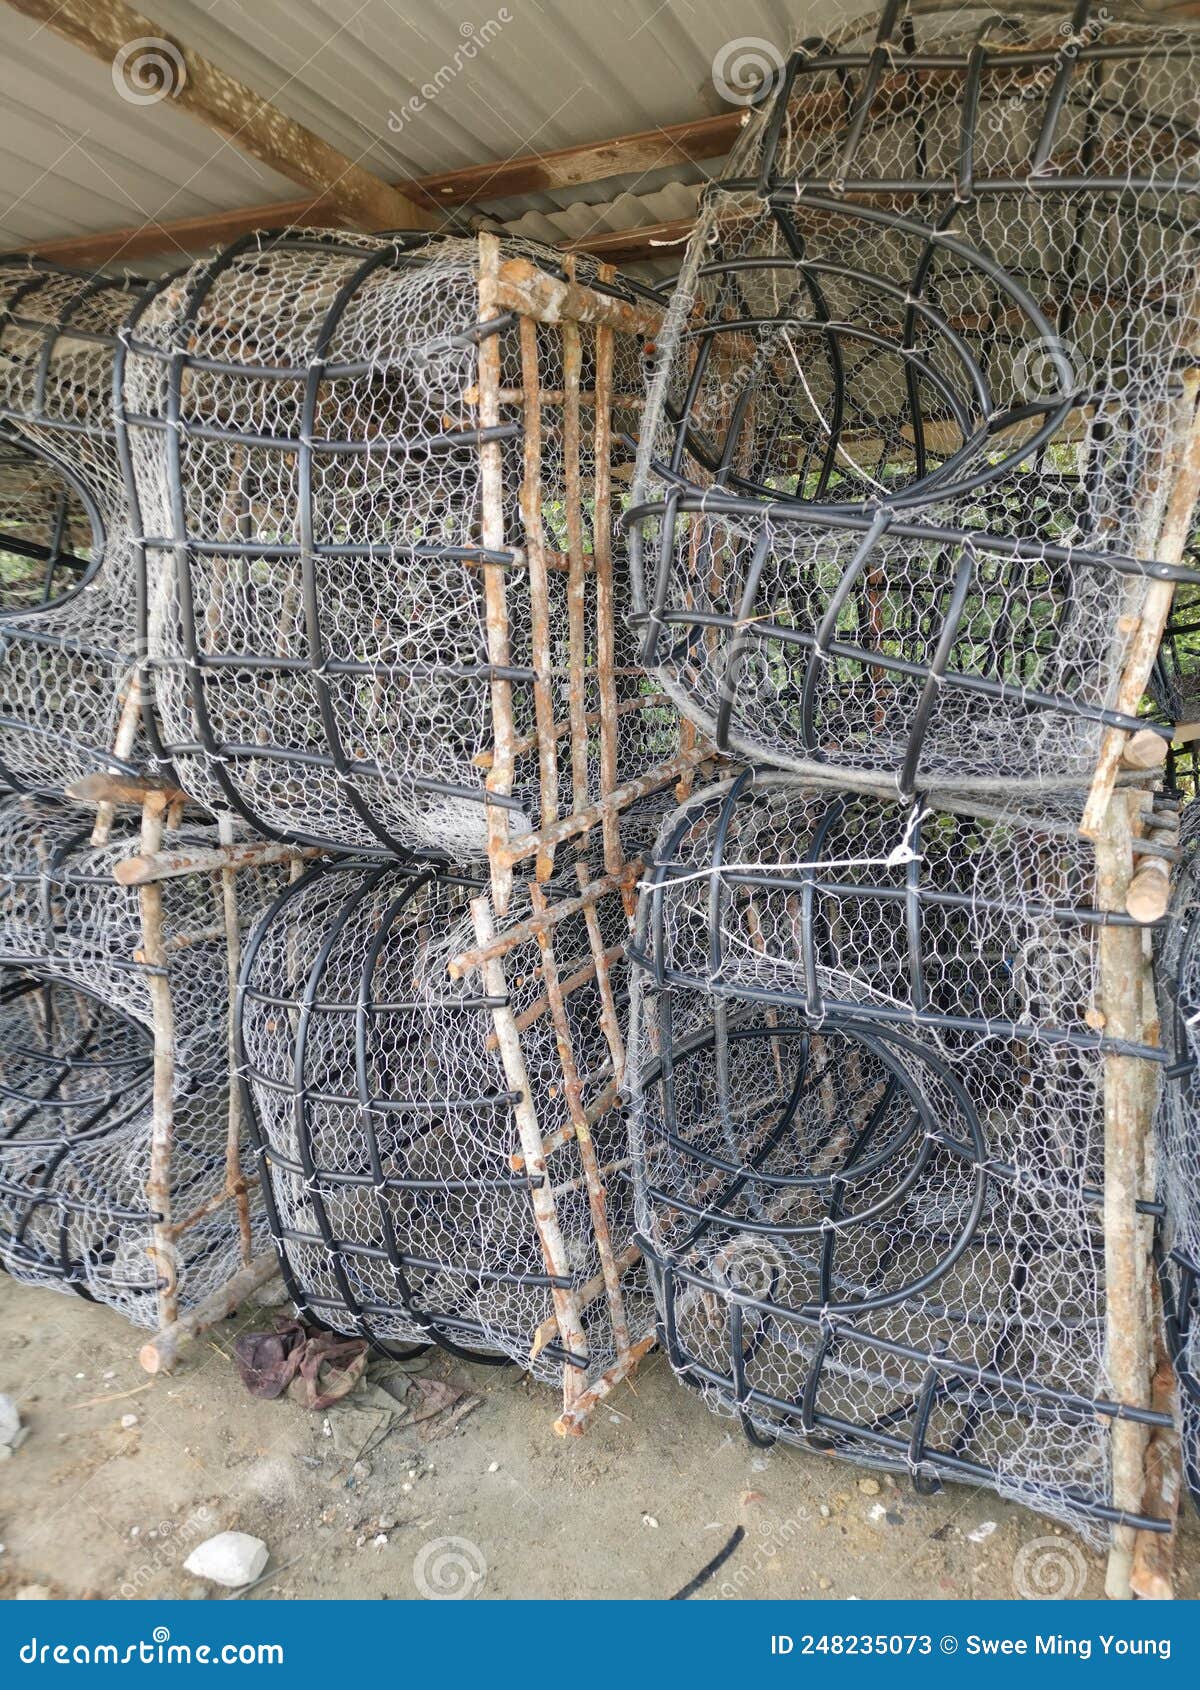 Outdoor Scene of the DIY Fish Trap Structure Make from Mangrove Wood,wire  and Polystyrene Pipe. Stock Image - Image of metallic, industry: 248235073